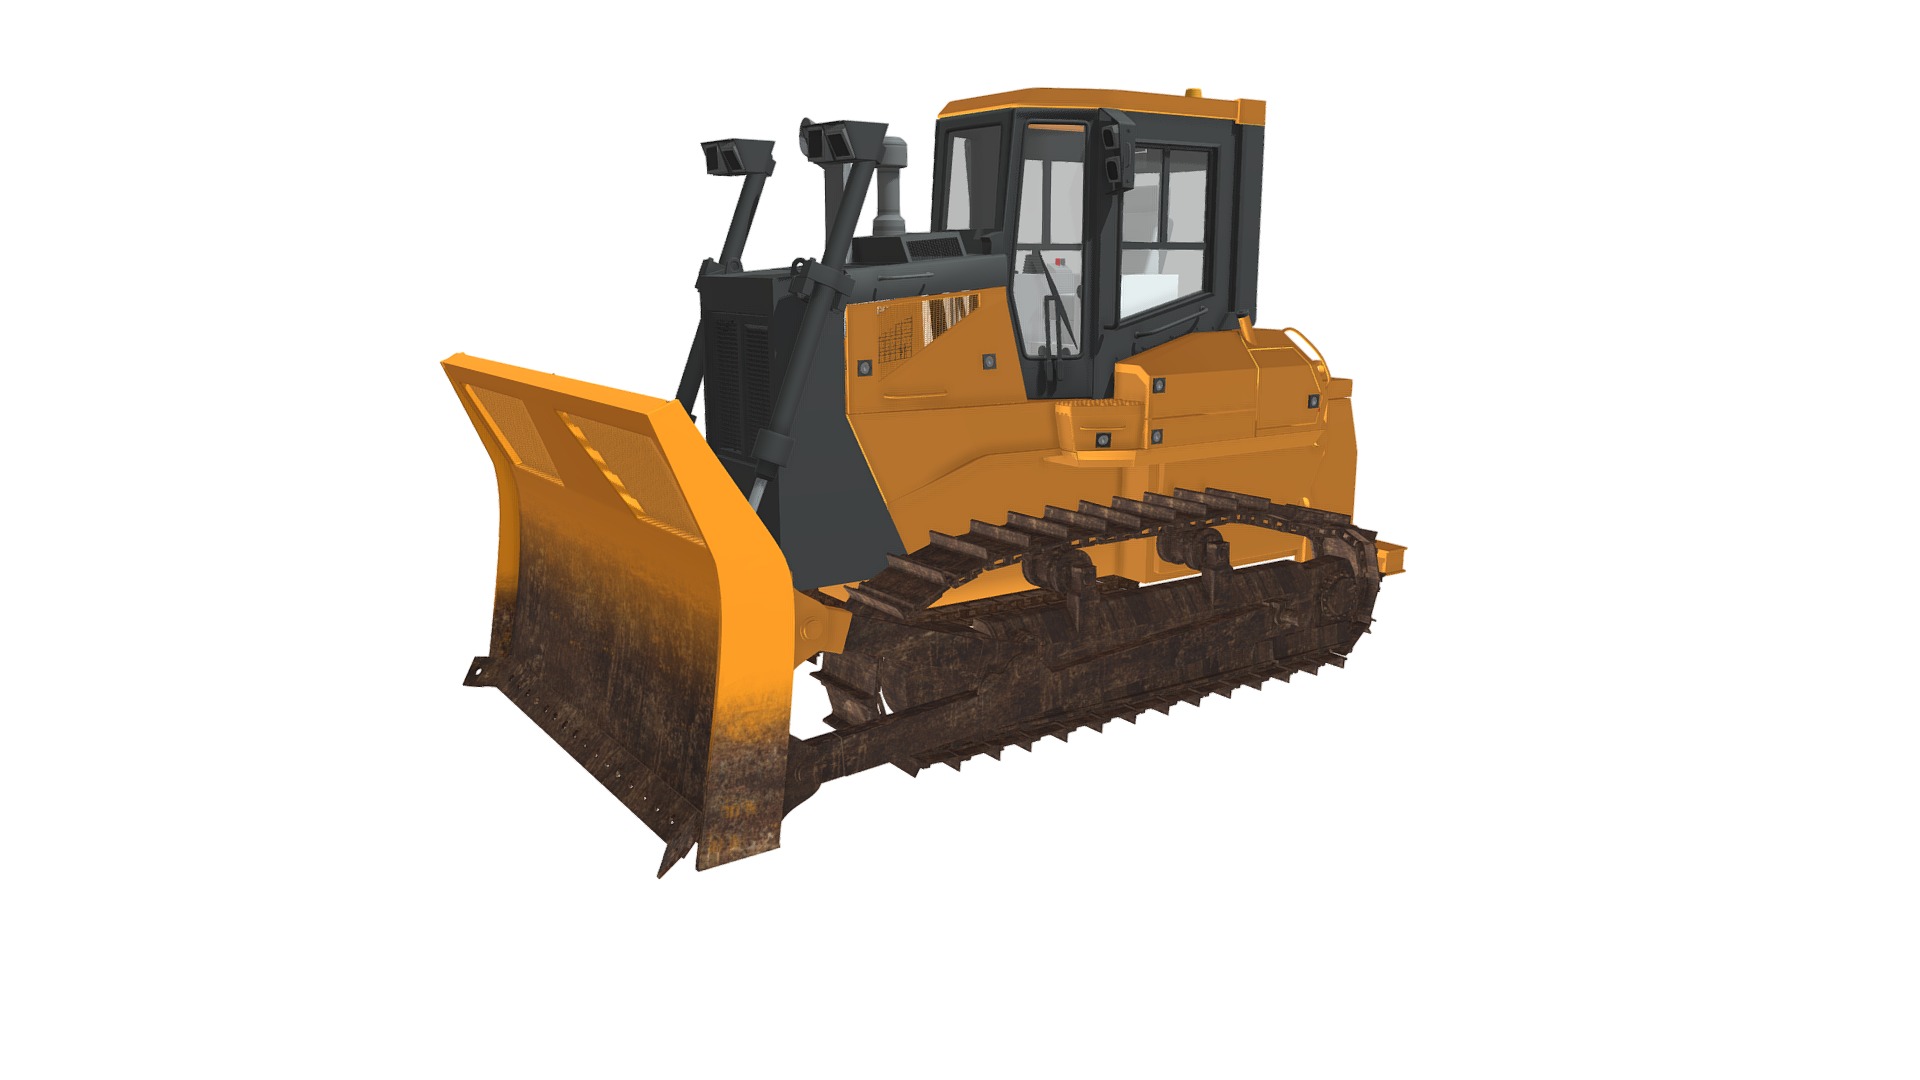 3D model Waste Handler - This is a 3D model of the Waste Handler. The 3D model is about a yellow and black bulldozer.